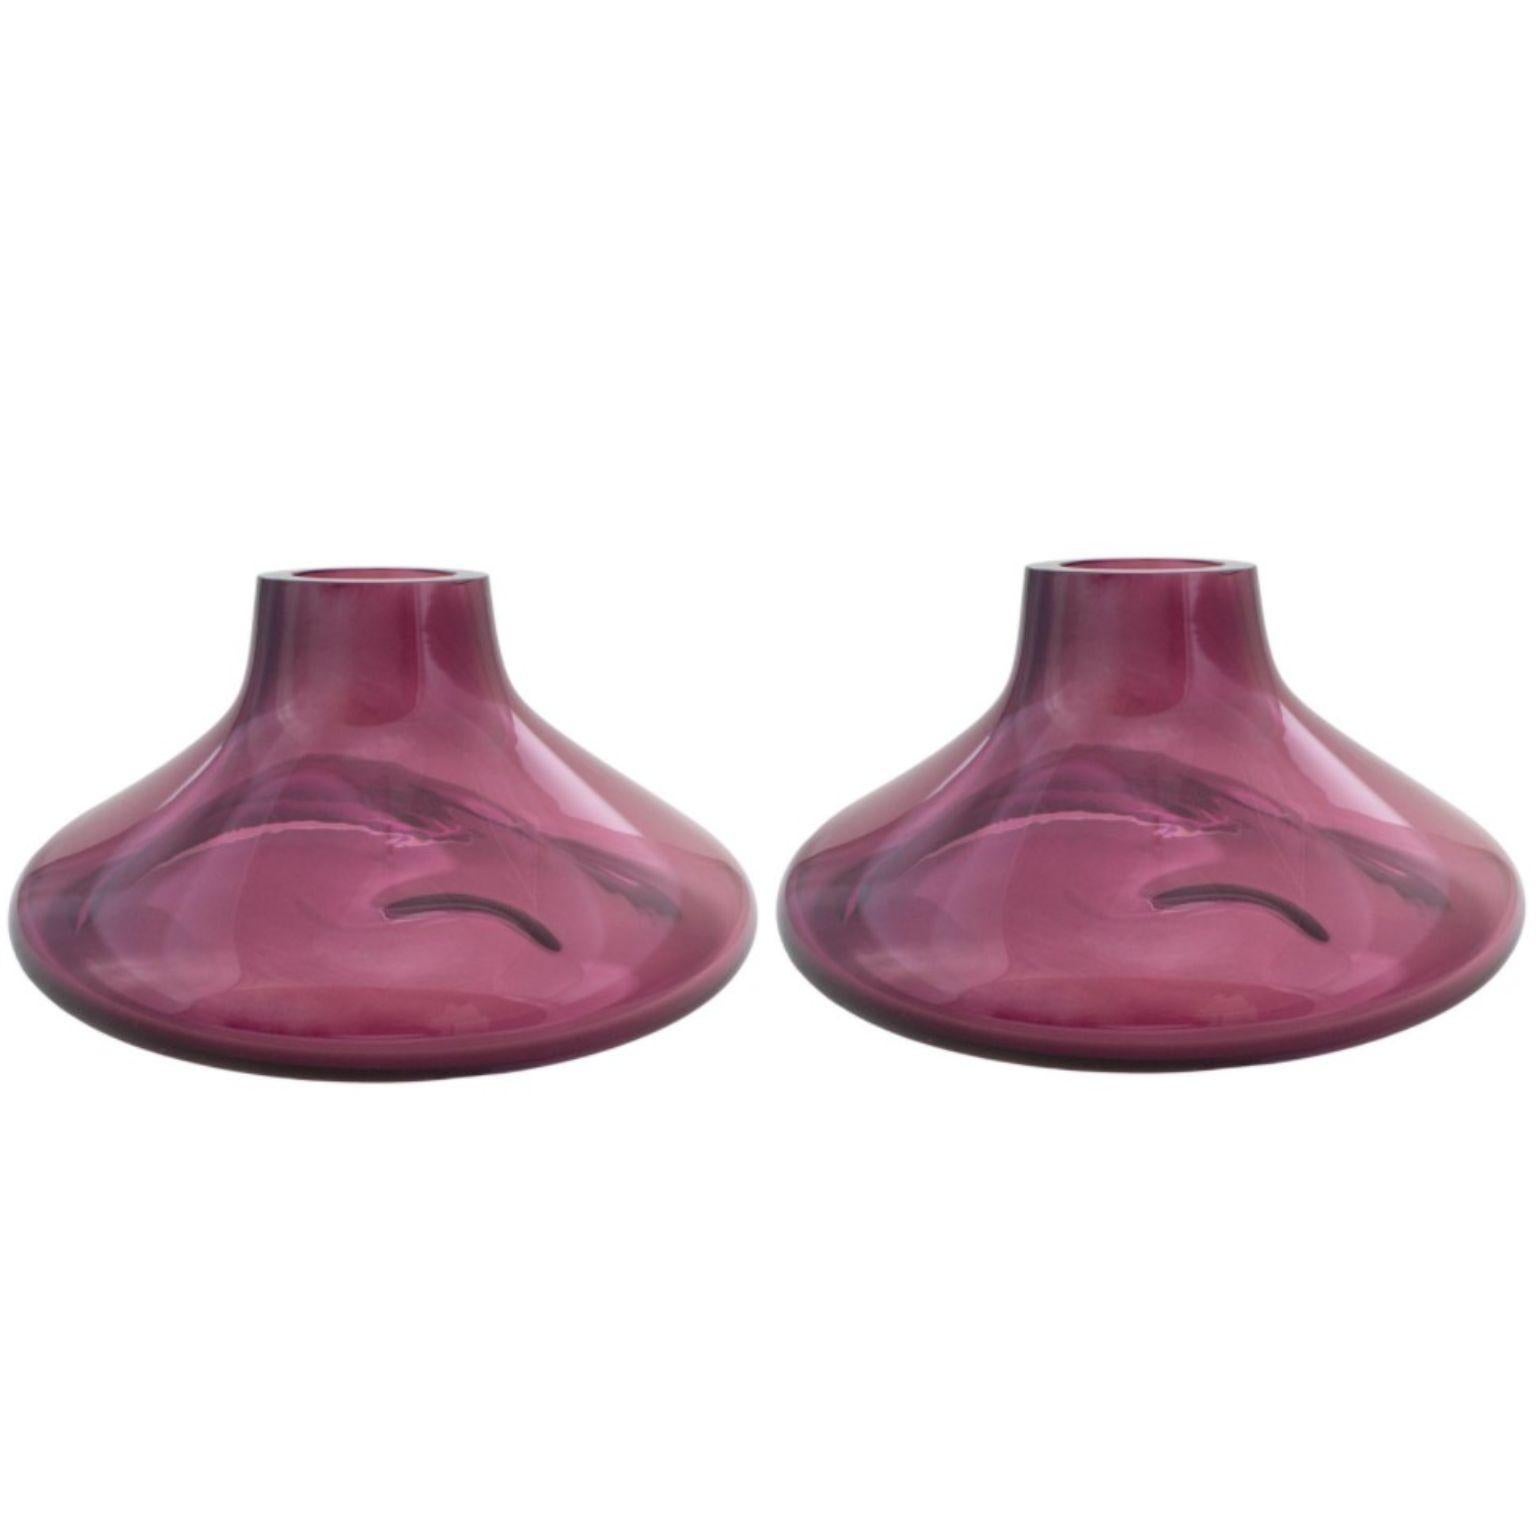 Set of 2 Makemake Purple Iridescent L Vase + Bowl by Eloa.
No UL listed 
Material: Glass
Dimensions: D40 x W40 x H25 cm
Also Available in different colours and dimensions.

Makemake is reminiscent of Jupiter‘s ring. The object was designed with a